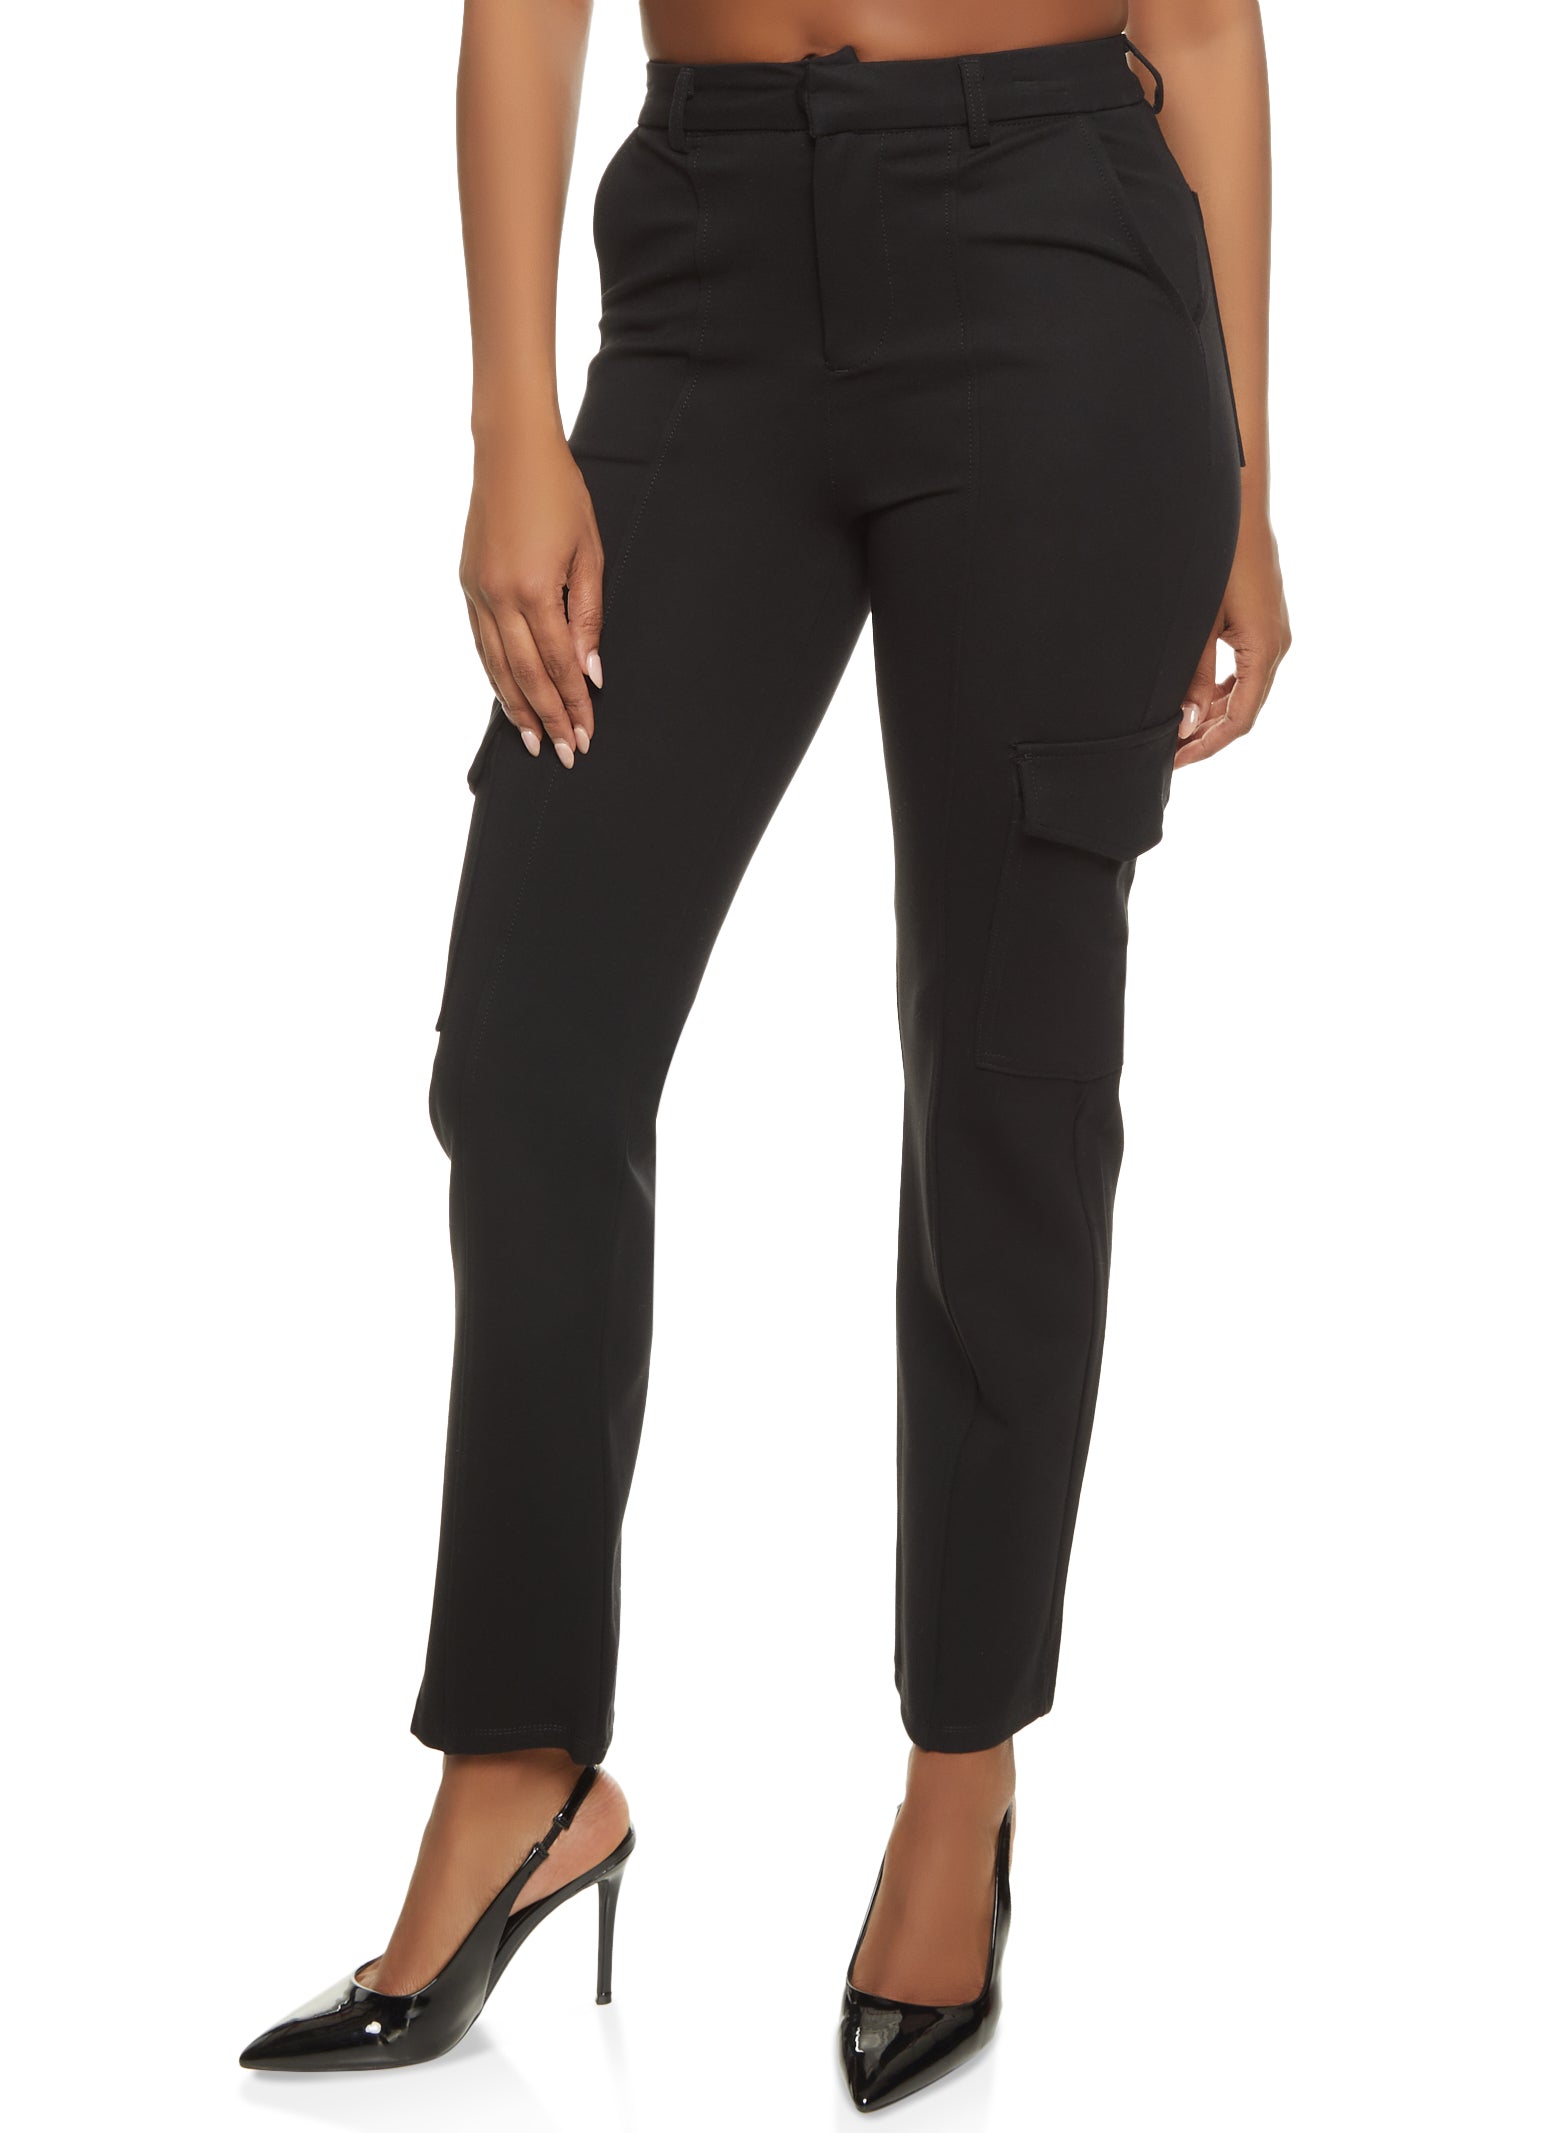 Womens Black Pants, Everyday Low Prices